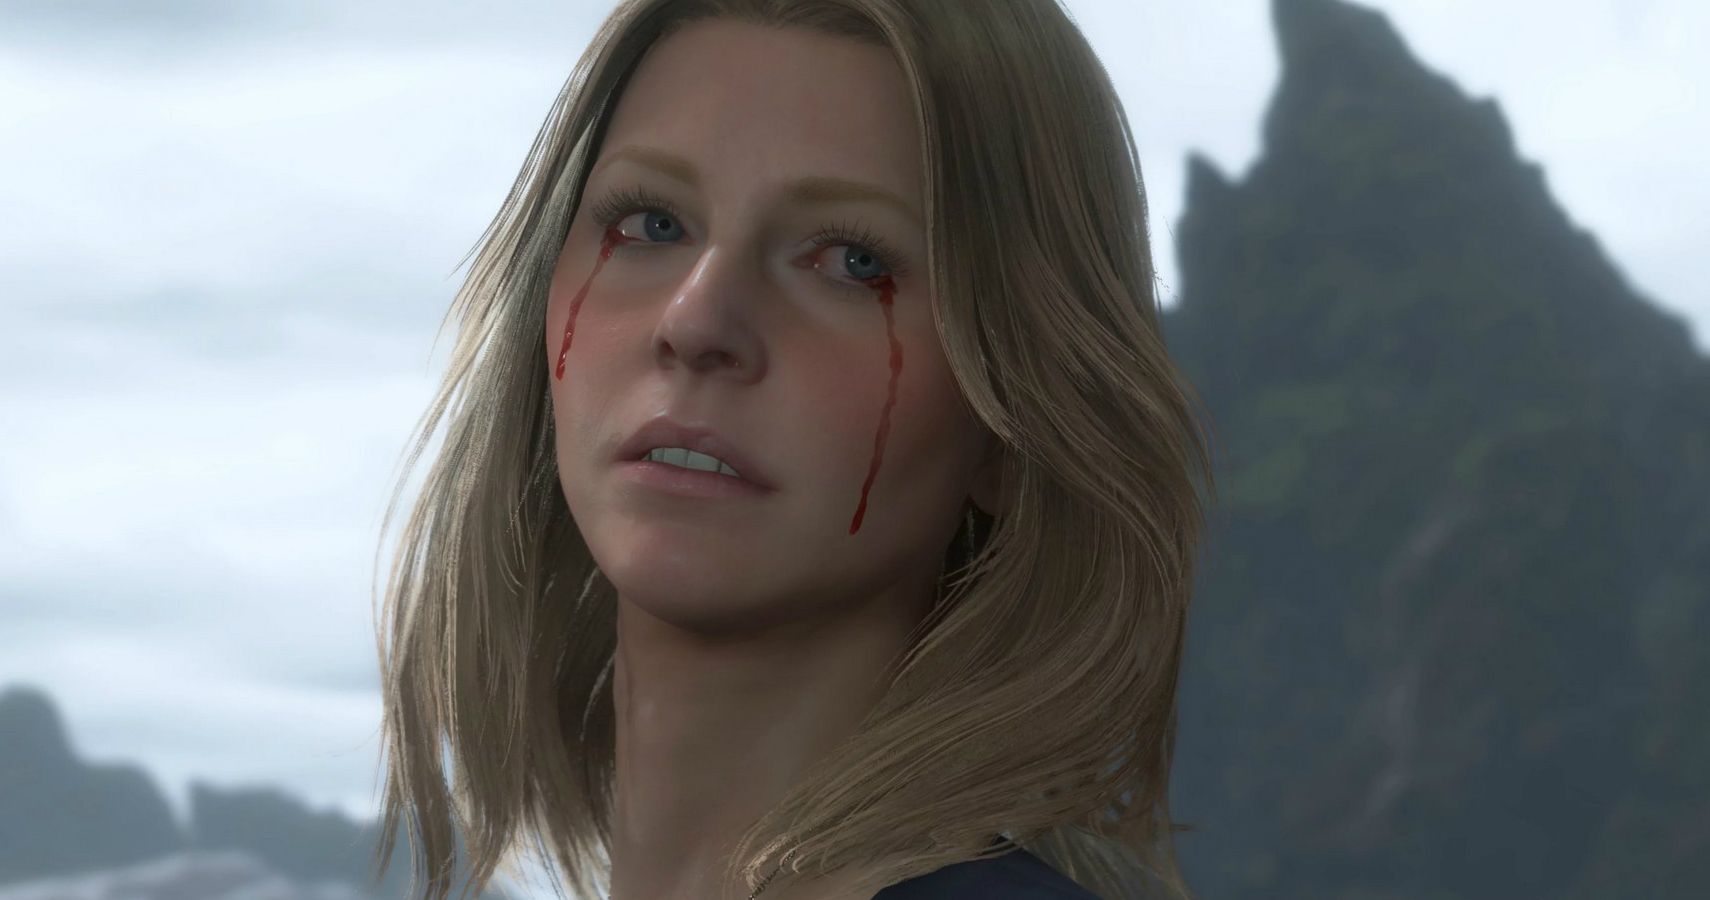 Why Death Stranding Is Dividing Its Players